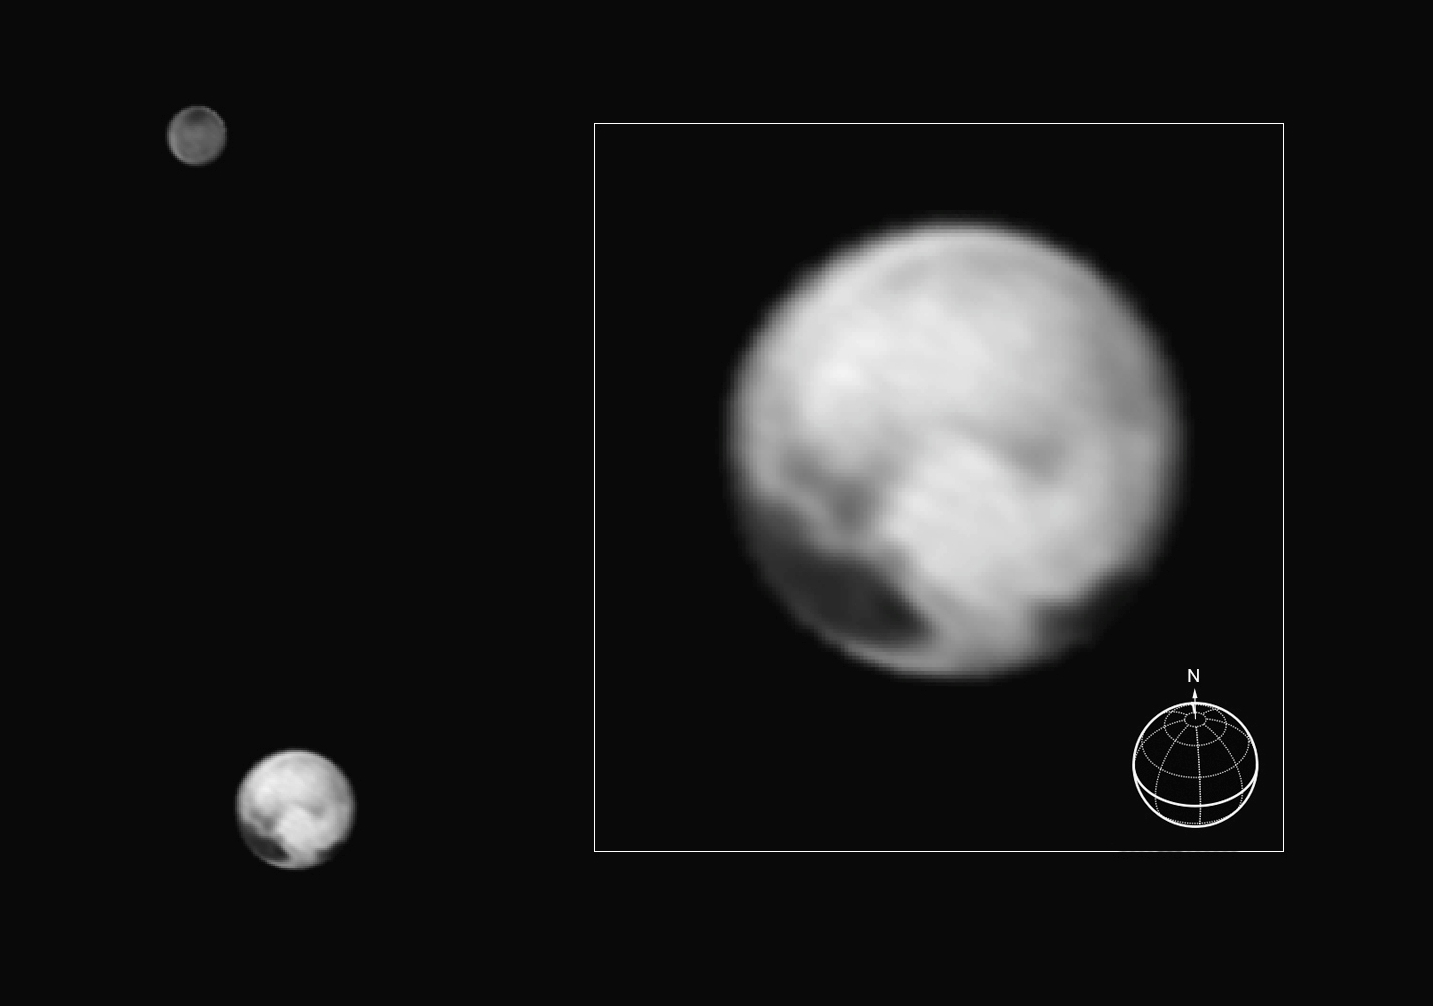 New Horizons view of Pluto and Charon, July 1, 2015